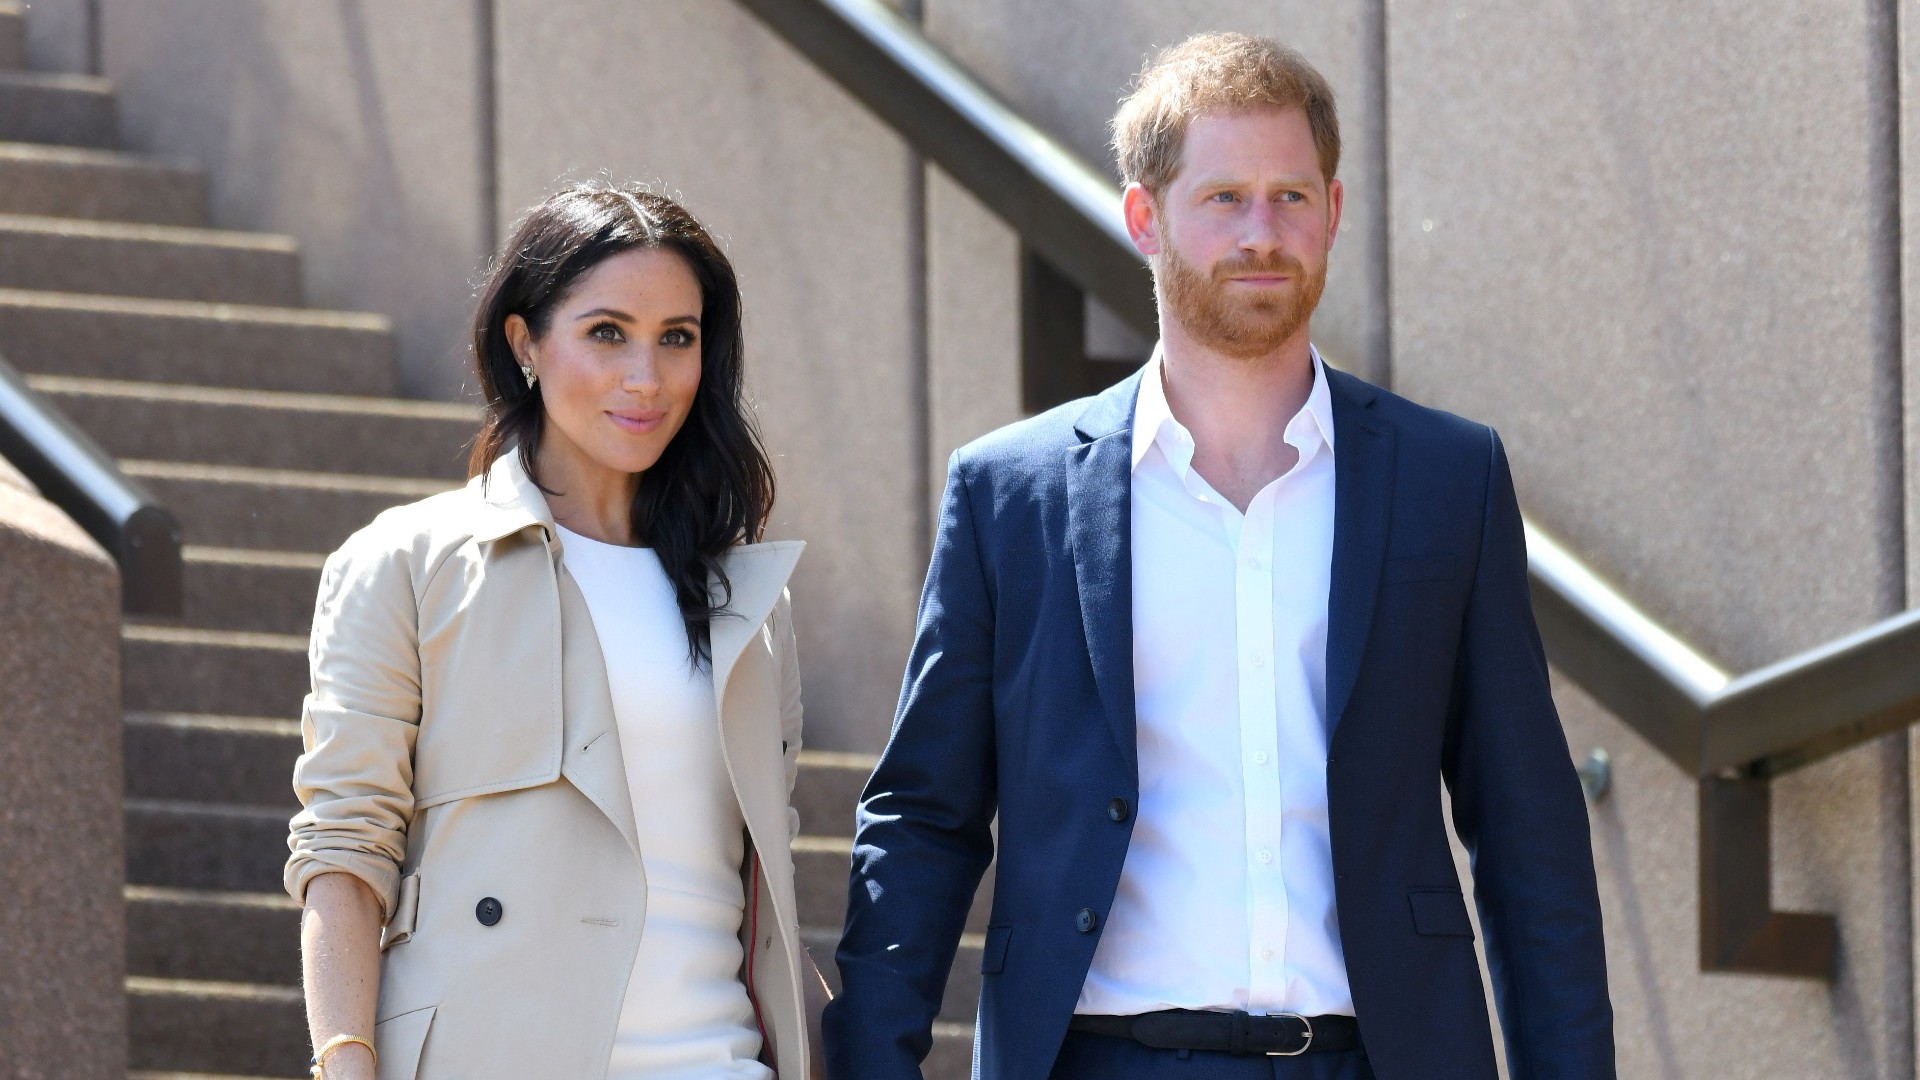 Meghan Markle Wore a J.Crew Coat for a Walk With Prince Harry | Marie ...